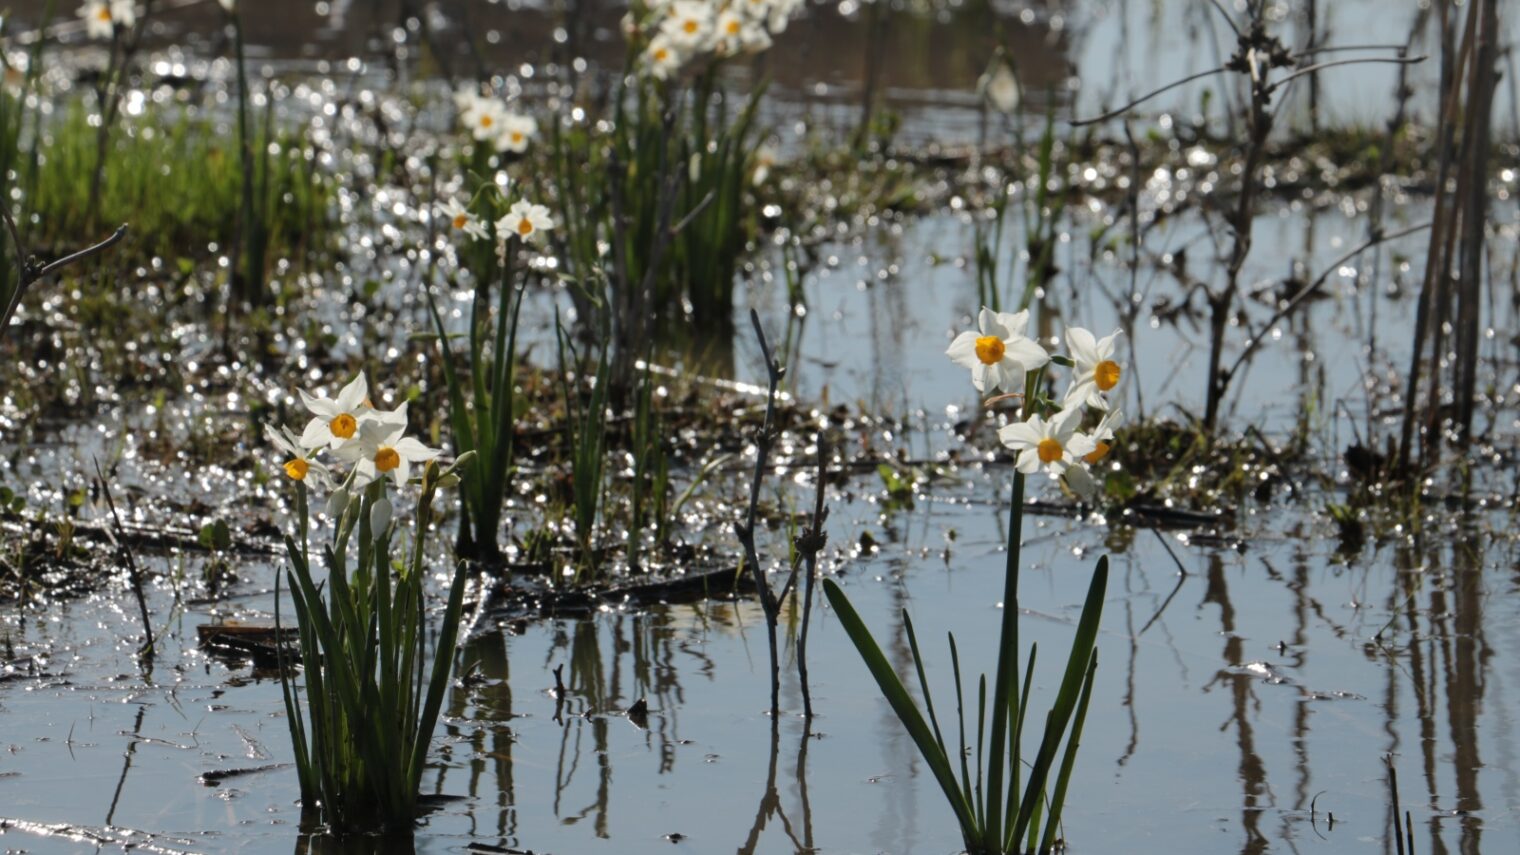 Narcissi are once again blooming in the Kishon River. Photo by Olga Vdov/Kishon River Authority